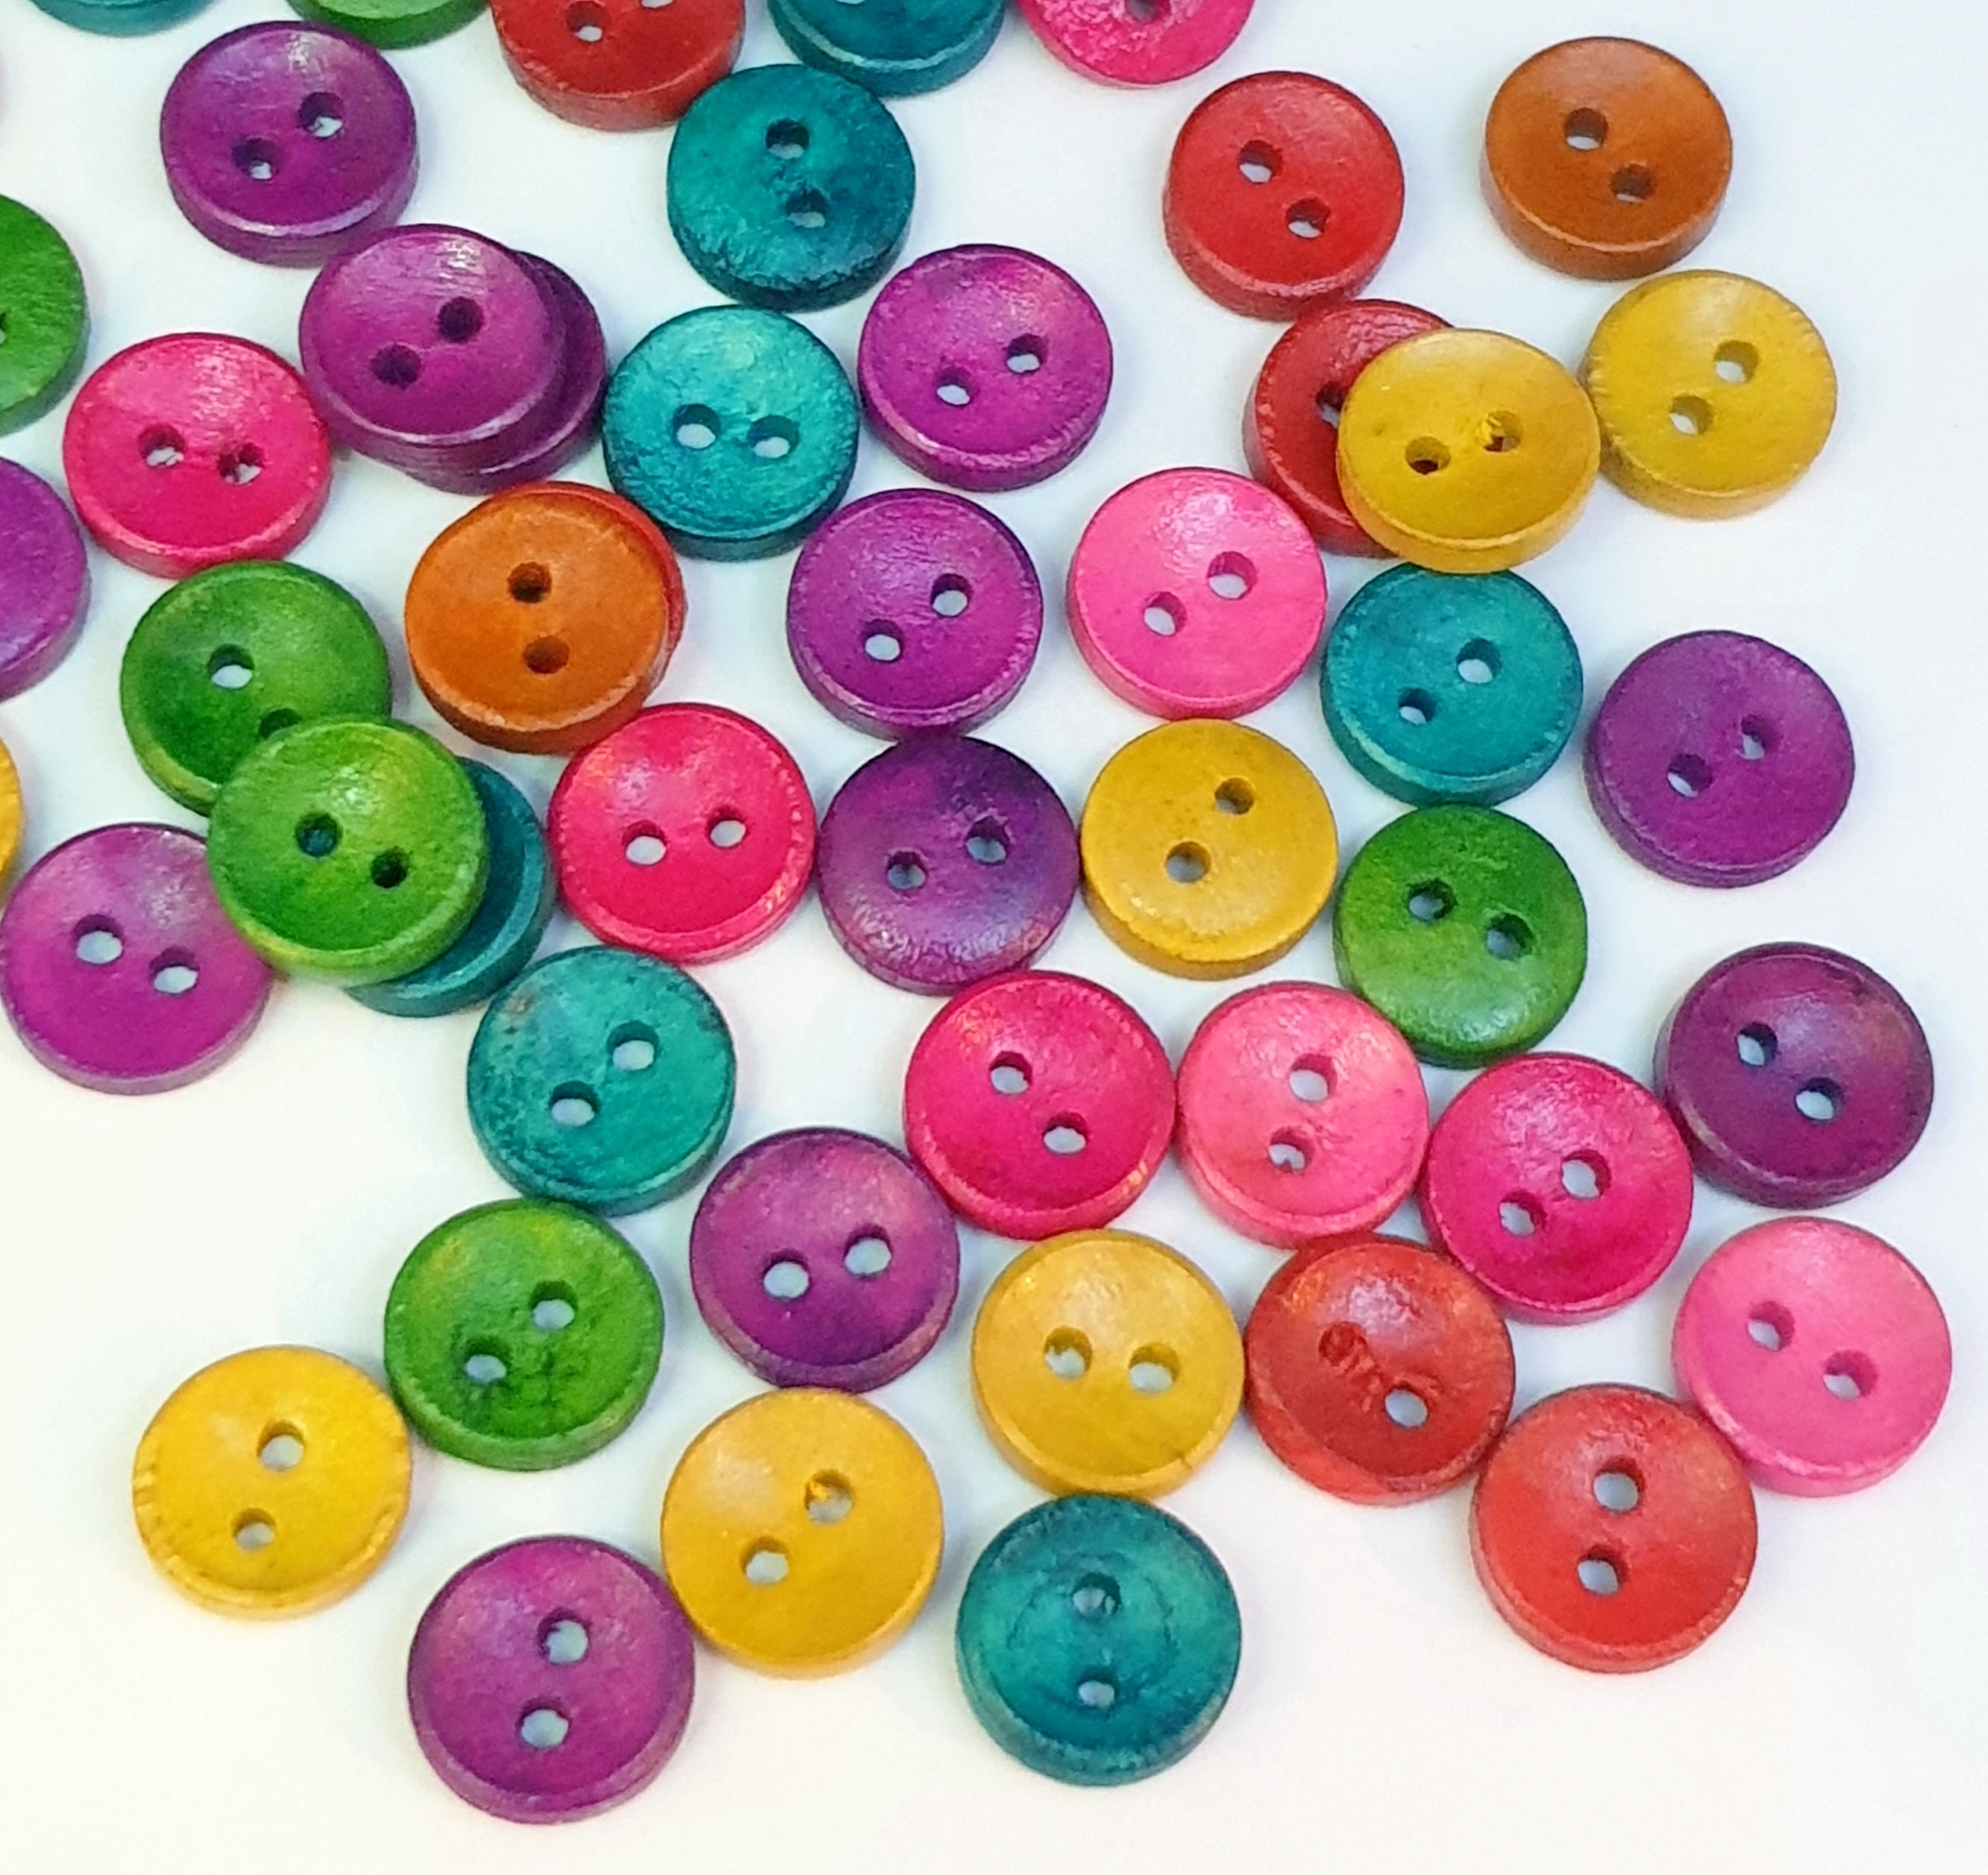 MajorCrafts 48pcs 10mm Random Mixed Colours Plain Round 2 Holes Small Wooden Sewing Buttons